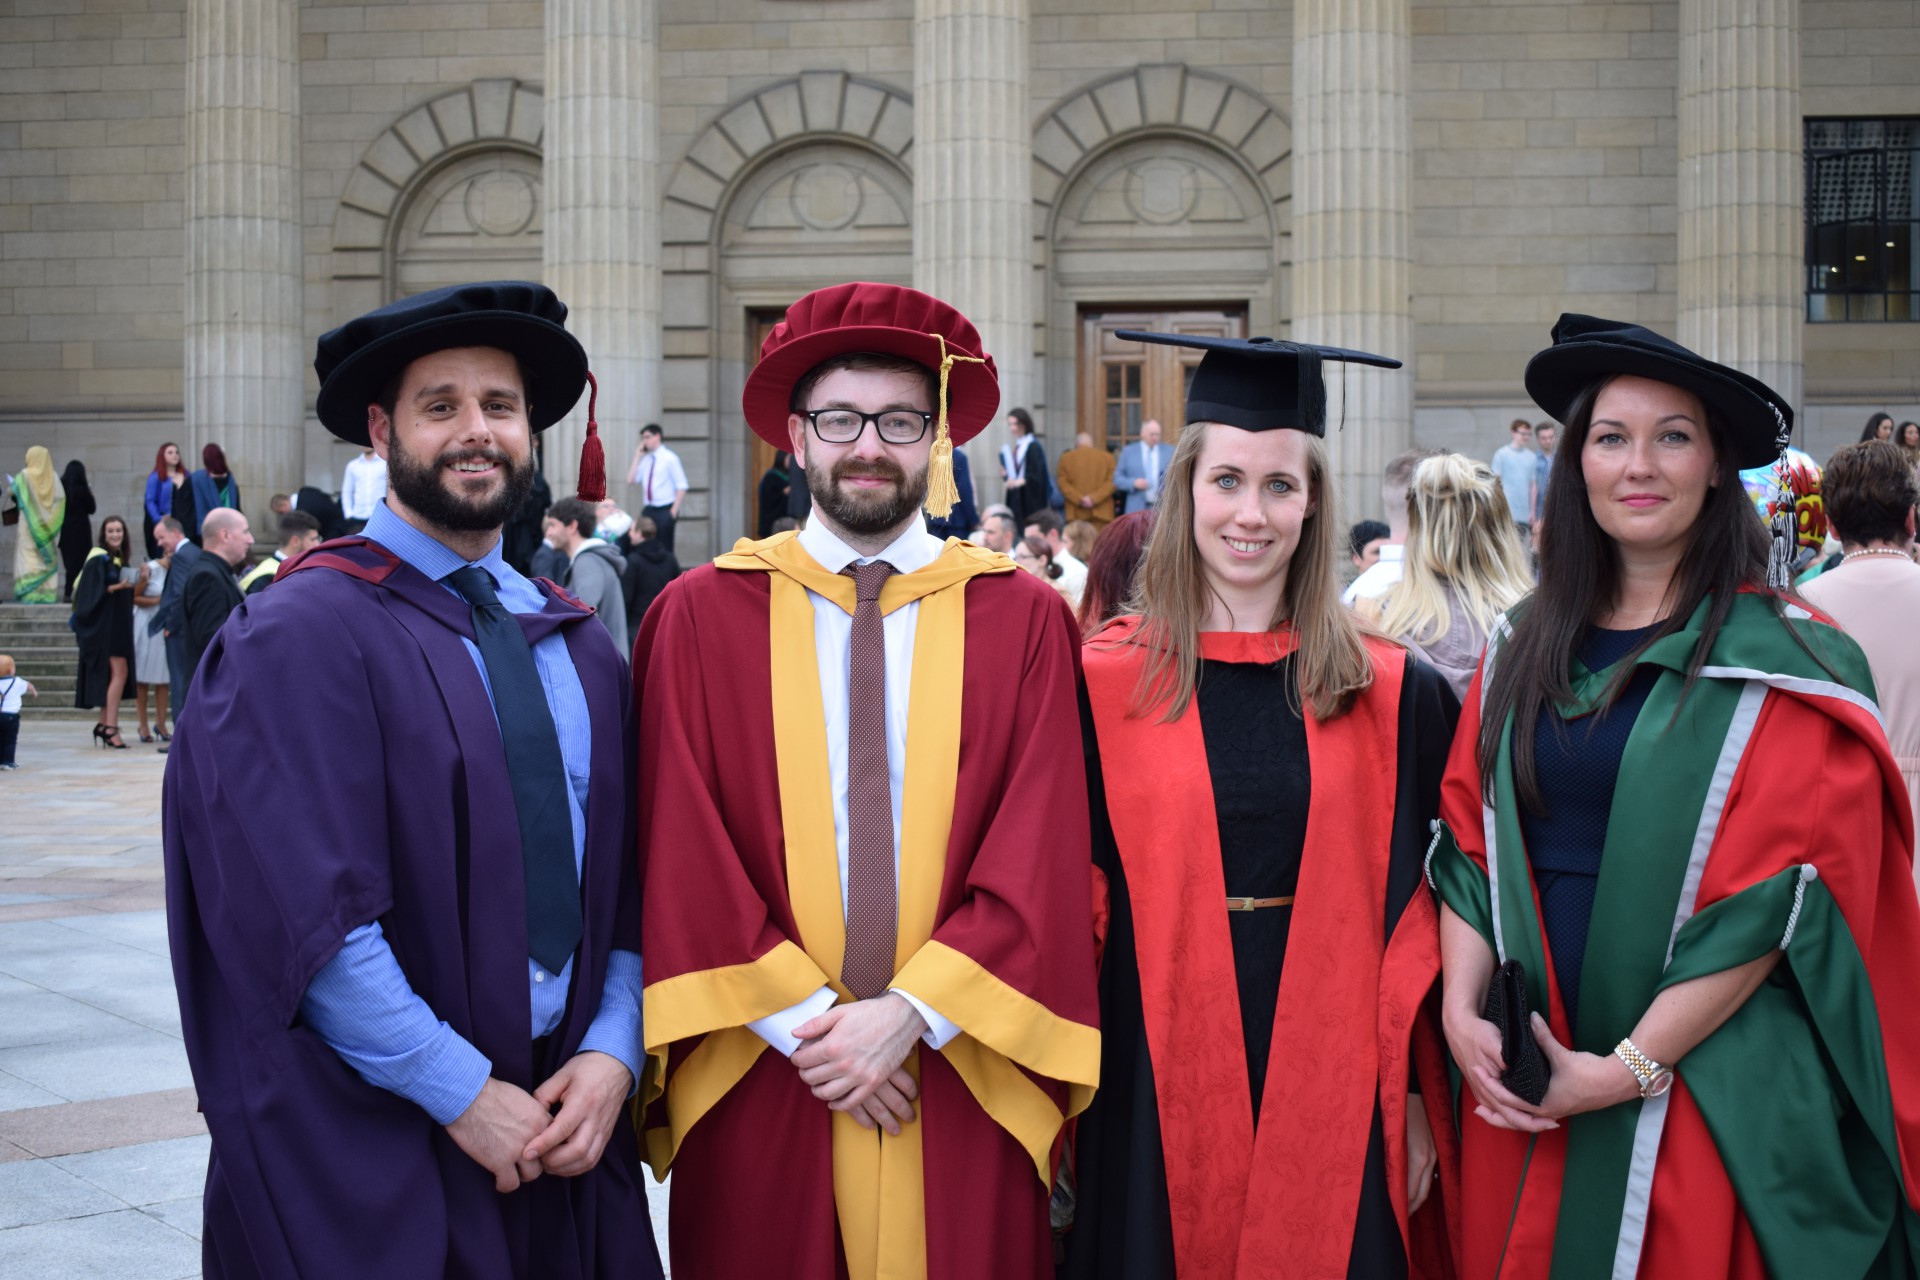 Four post graduate students wearing graduation gowns